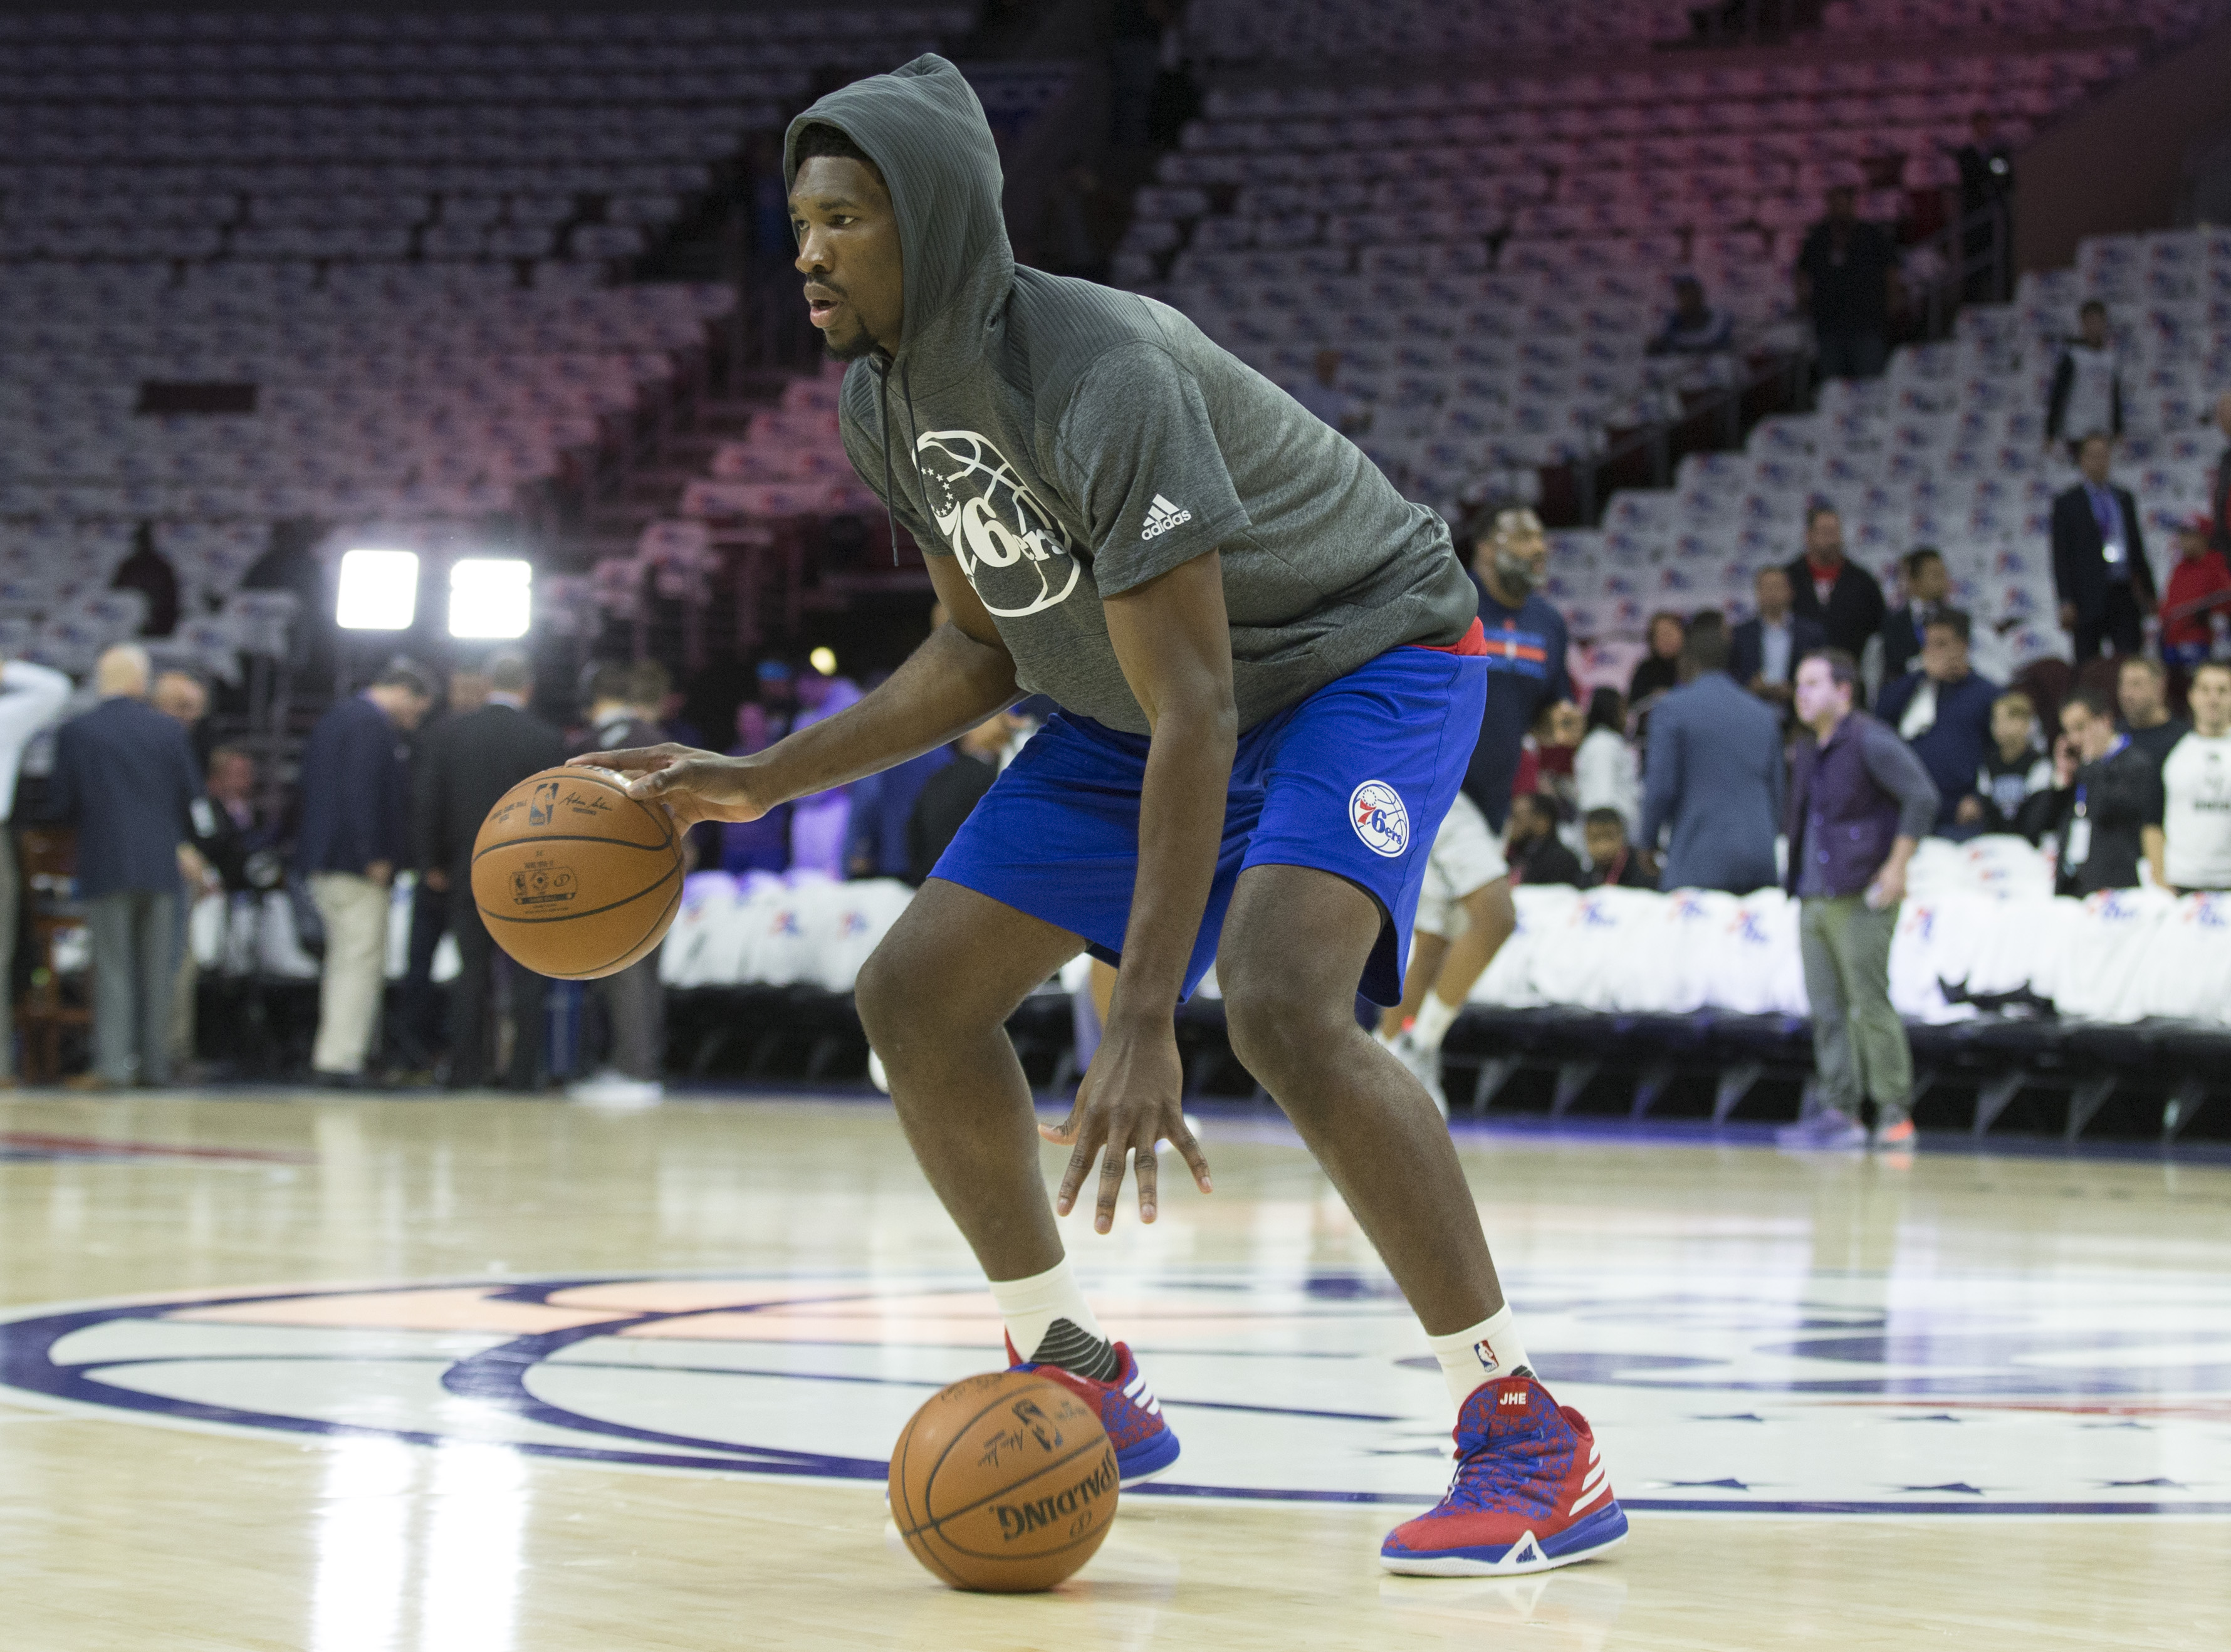 PHILADELPHIA, PA - OCTOBER 26: Joel Embiid #21 of the Philadelphia 76ers warms up prior to the game against the Oklahoma City Thunder at Wells Fargo Center on October 26, 2016 in Philadelphia, Pennsylvania. NOTE TO USER: User expressly acknowledges and agrees that, by downloading and or using this photograph, User is consenting to the terms and conditions of the Getty Images License Agreement.   Mitchell Leff/Getty Images/AFP